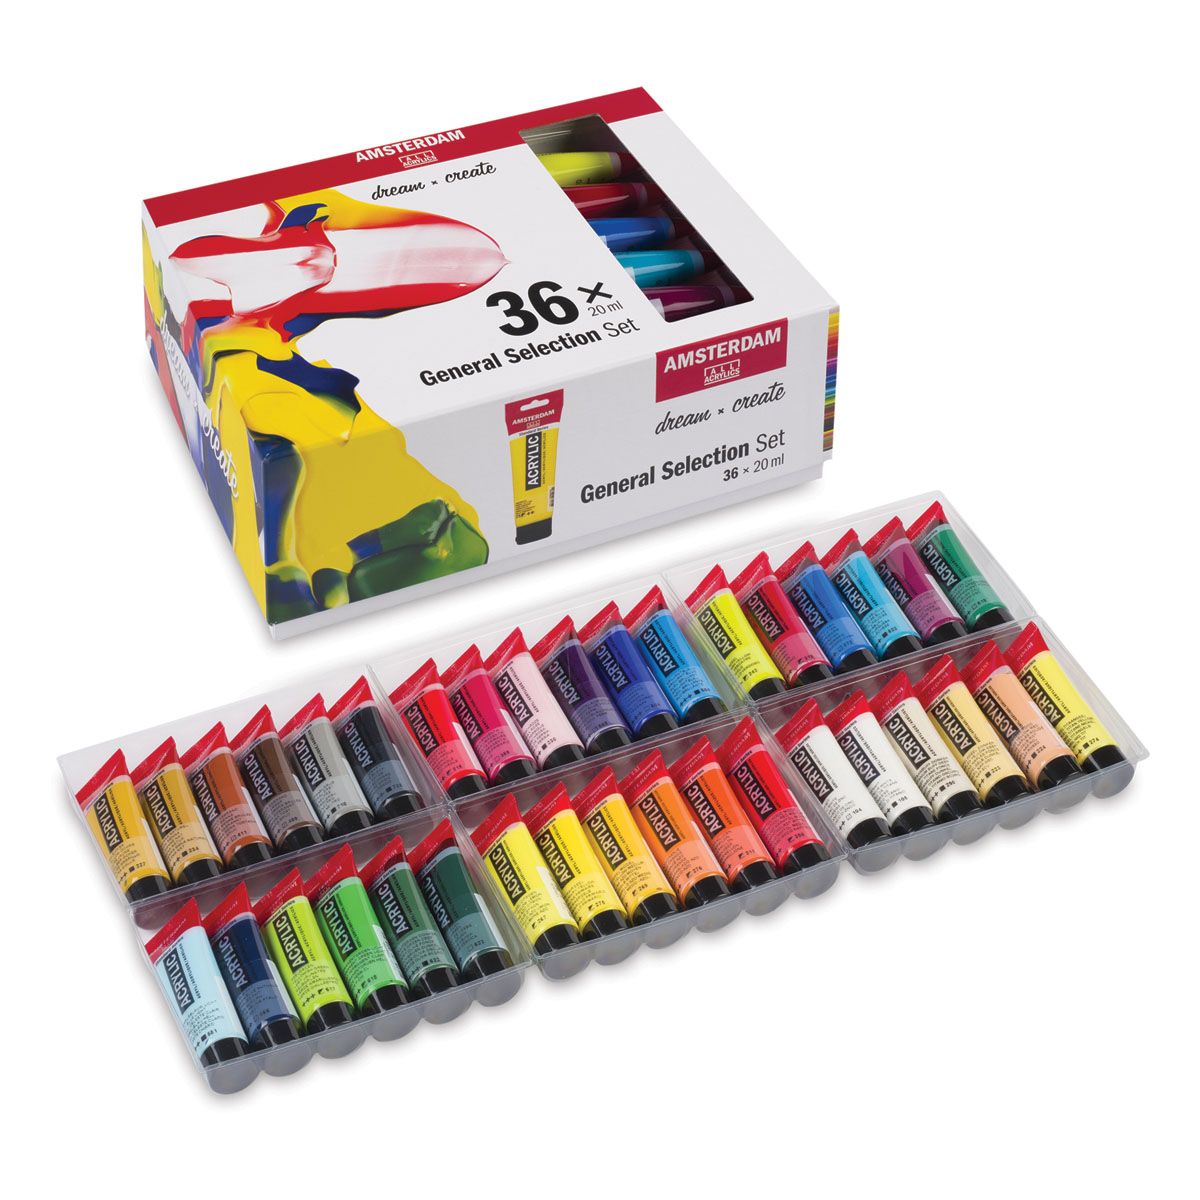 Amsterdam Standard Series Acrylic Paints and Sets | BLICK Art Materials